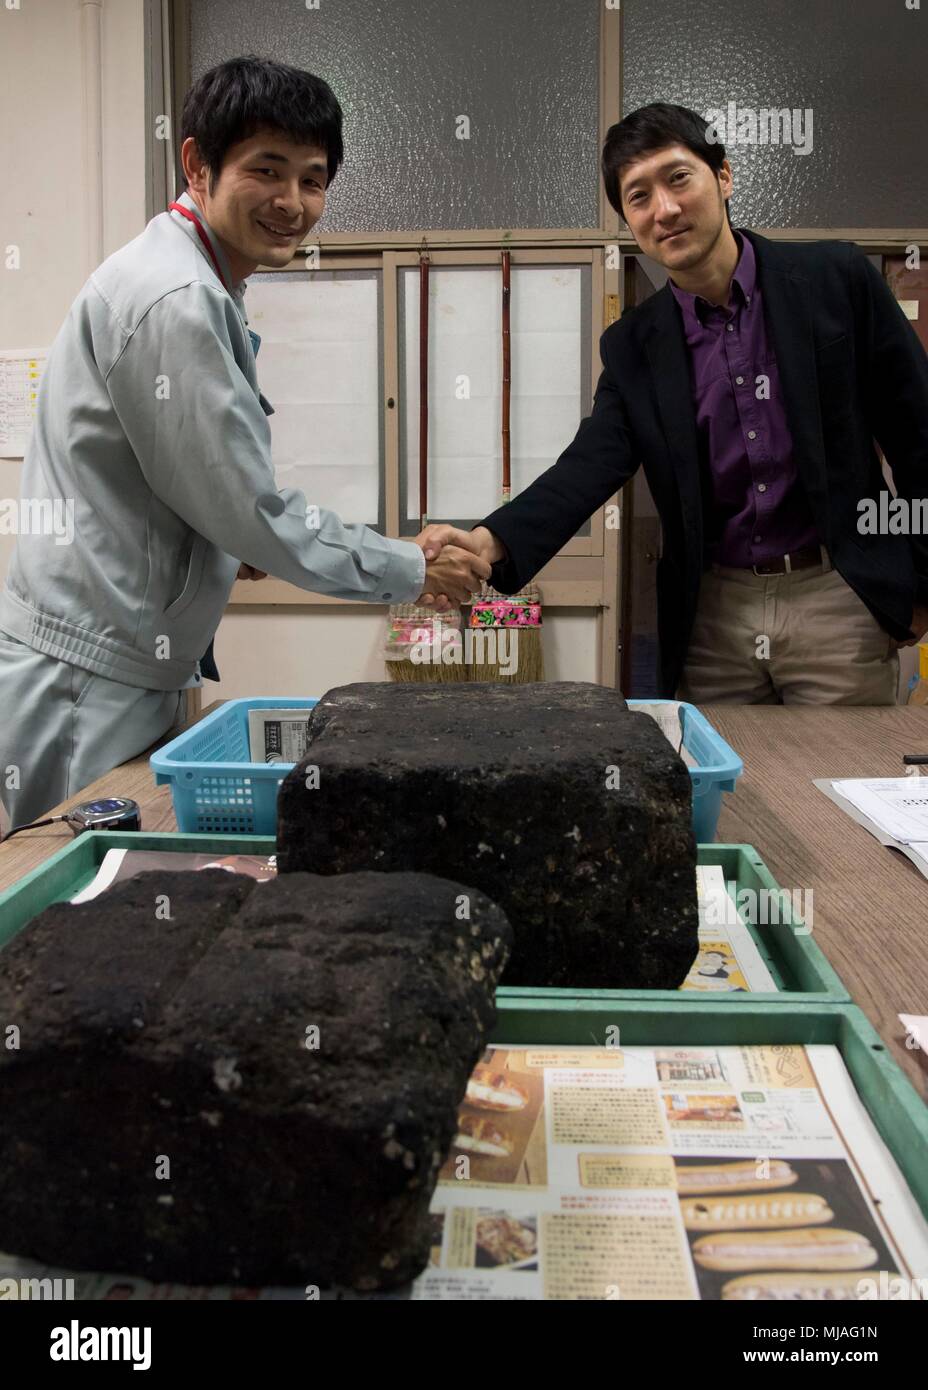 SASEBO, Japan (Apr. 25, 2018) Sasebo City archeologist Atsushi Kawachino and Commander, Fleet Activities Sasebo Cultural Resources Manager Sean Suk shake hands after the turnover of three early 20th century Imperial Japanese Navy coal briquettes to Sasebo City Apr. 25, 2018.  The rare briquettes were fuel for naval vessels and were manufactured by the Tokuyama naval fuel depot in Yamaguchi Prefecture. These were dredged up in CFAS waters during an environmental resources survey conducted in February and turned over to Sasebo City for curation and display. (U.S. Navy photo by Mass Communication Stock Photo